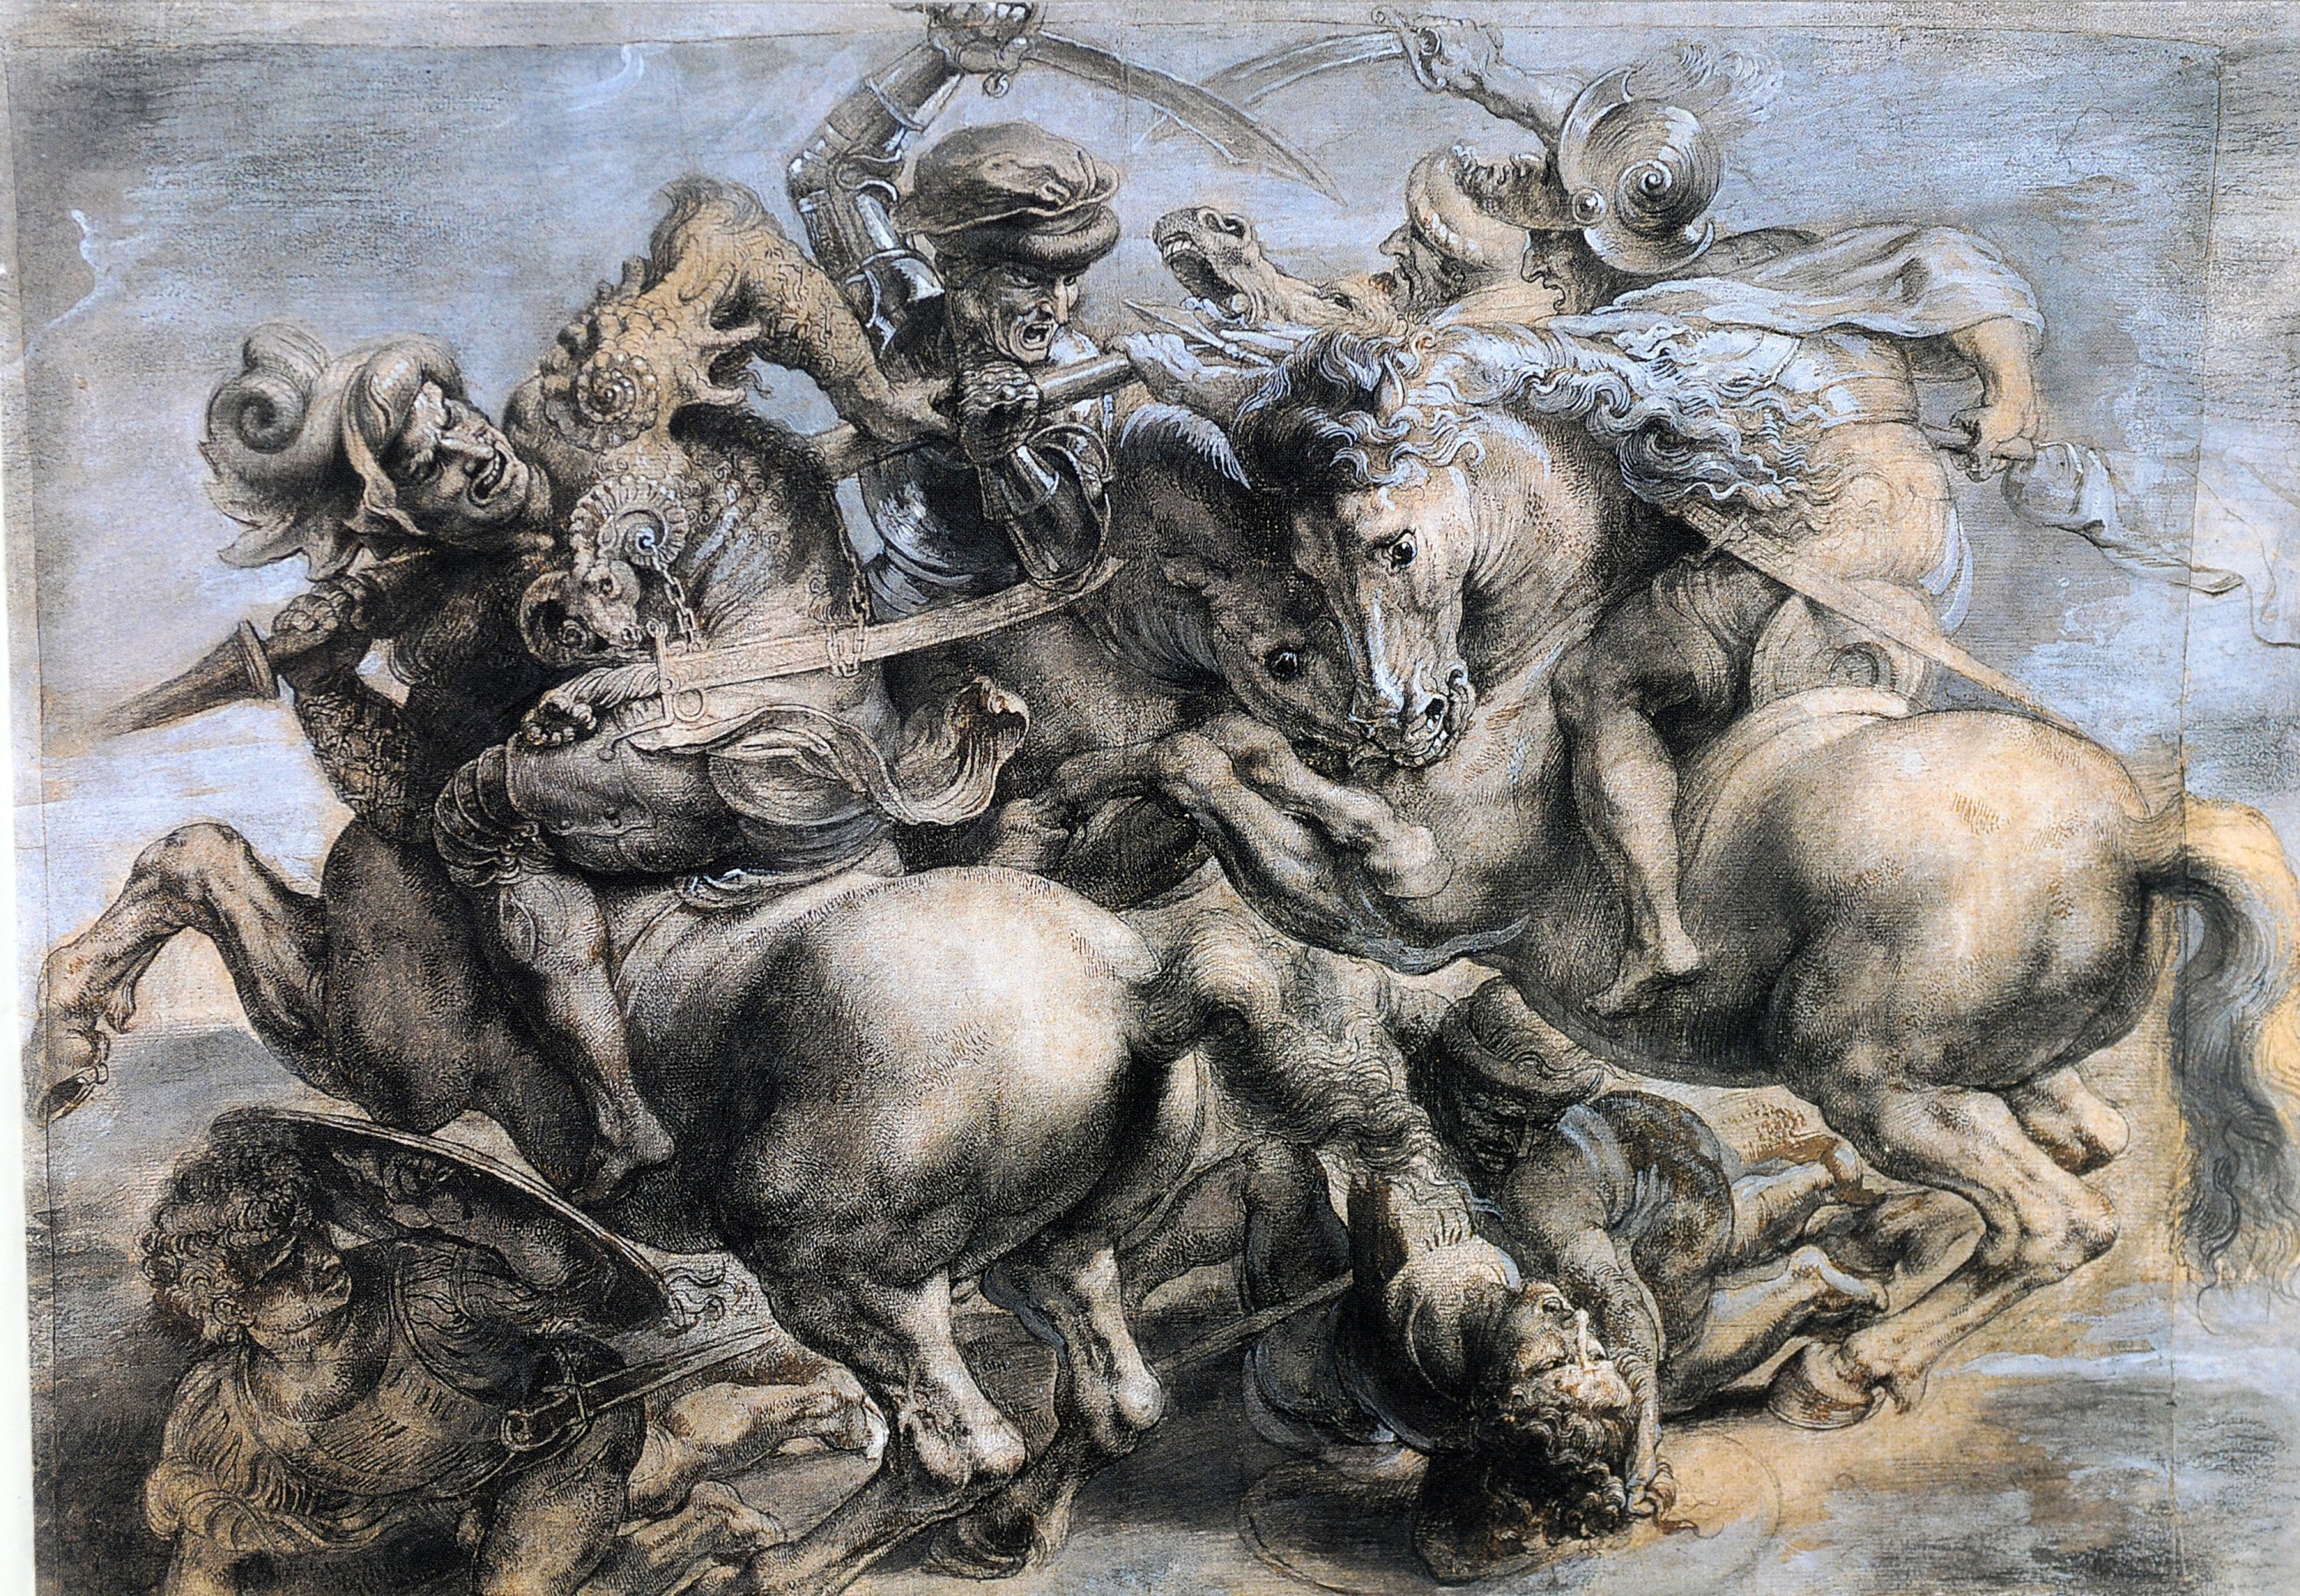 The copy of 'The Battle of Anghiari' painted by Flemish artist Peter Paul Rubens in Louvre Museum, Paris. (REUTERS PHOTO)
